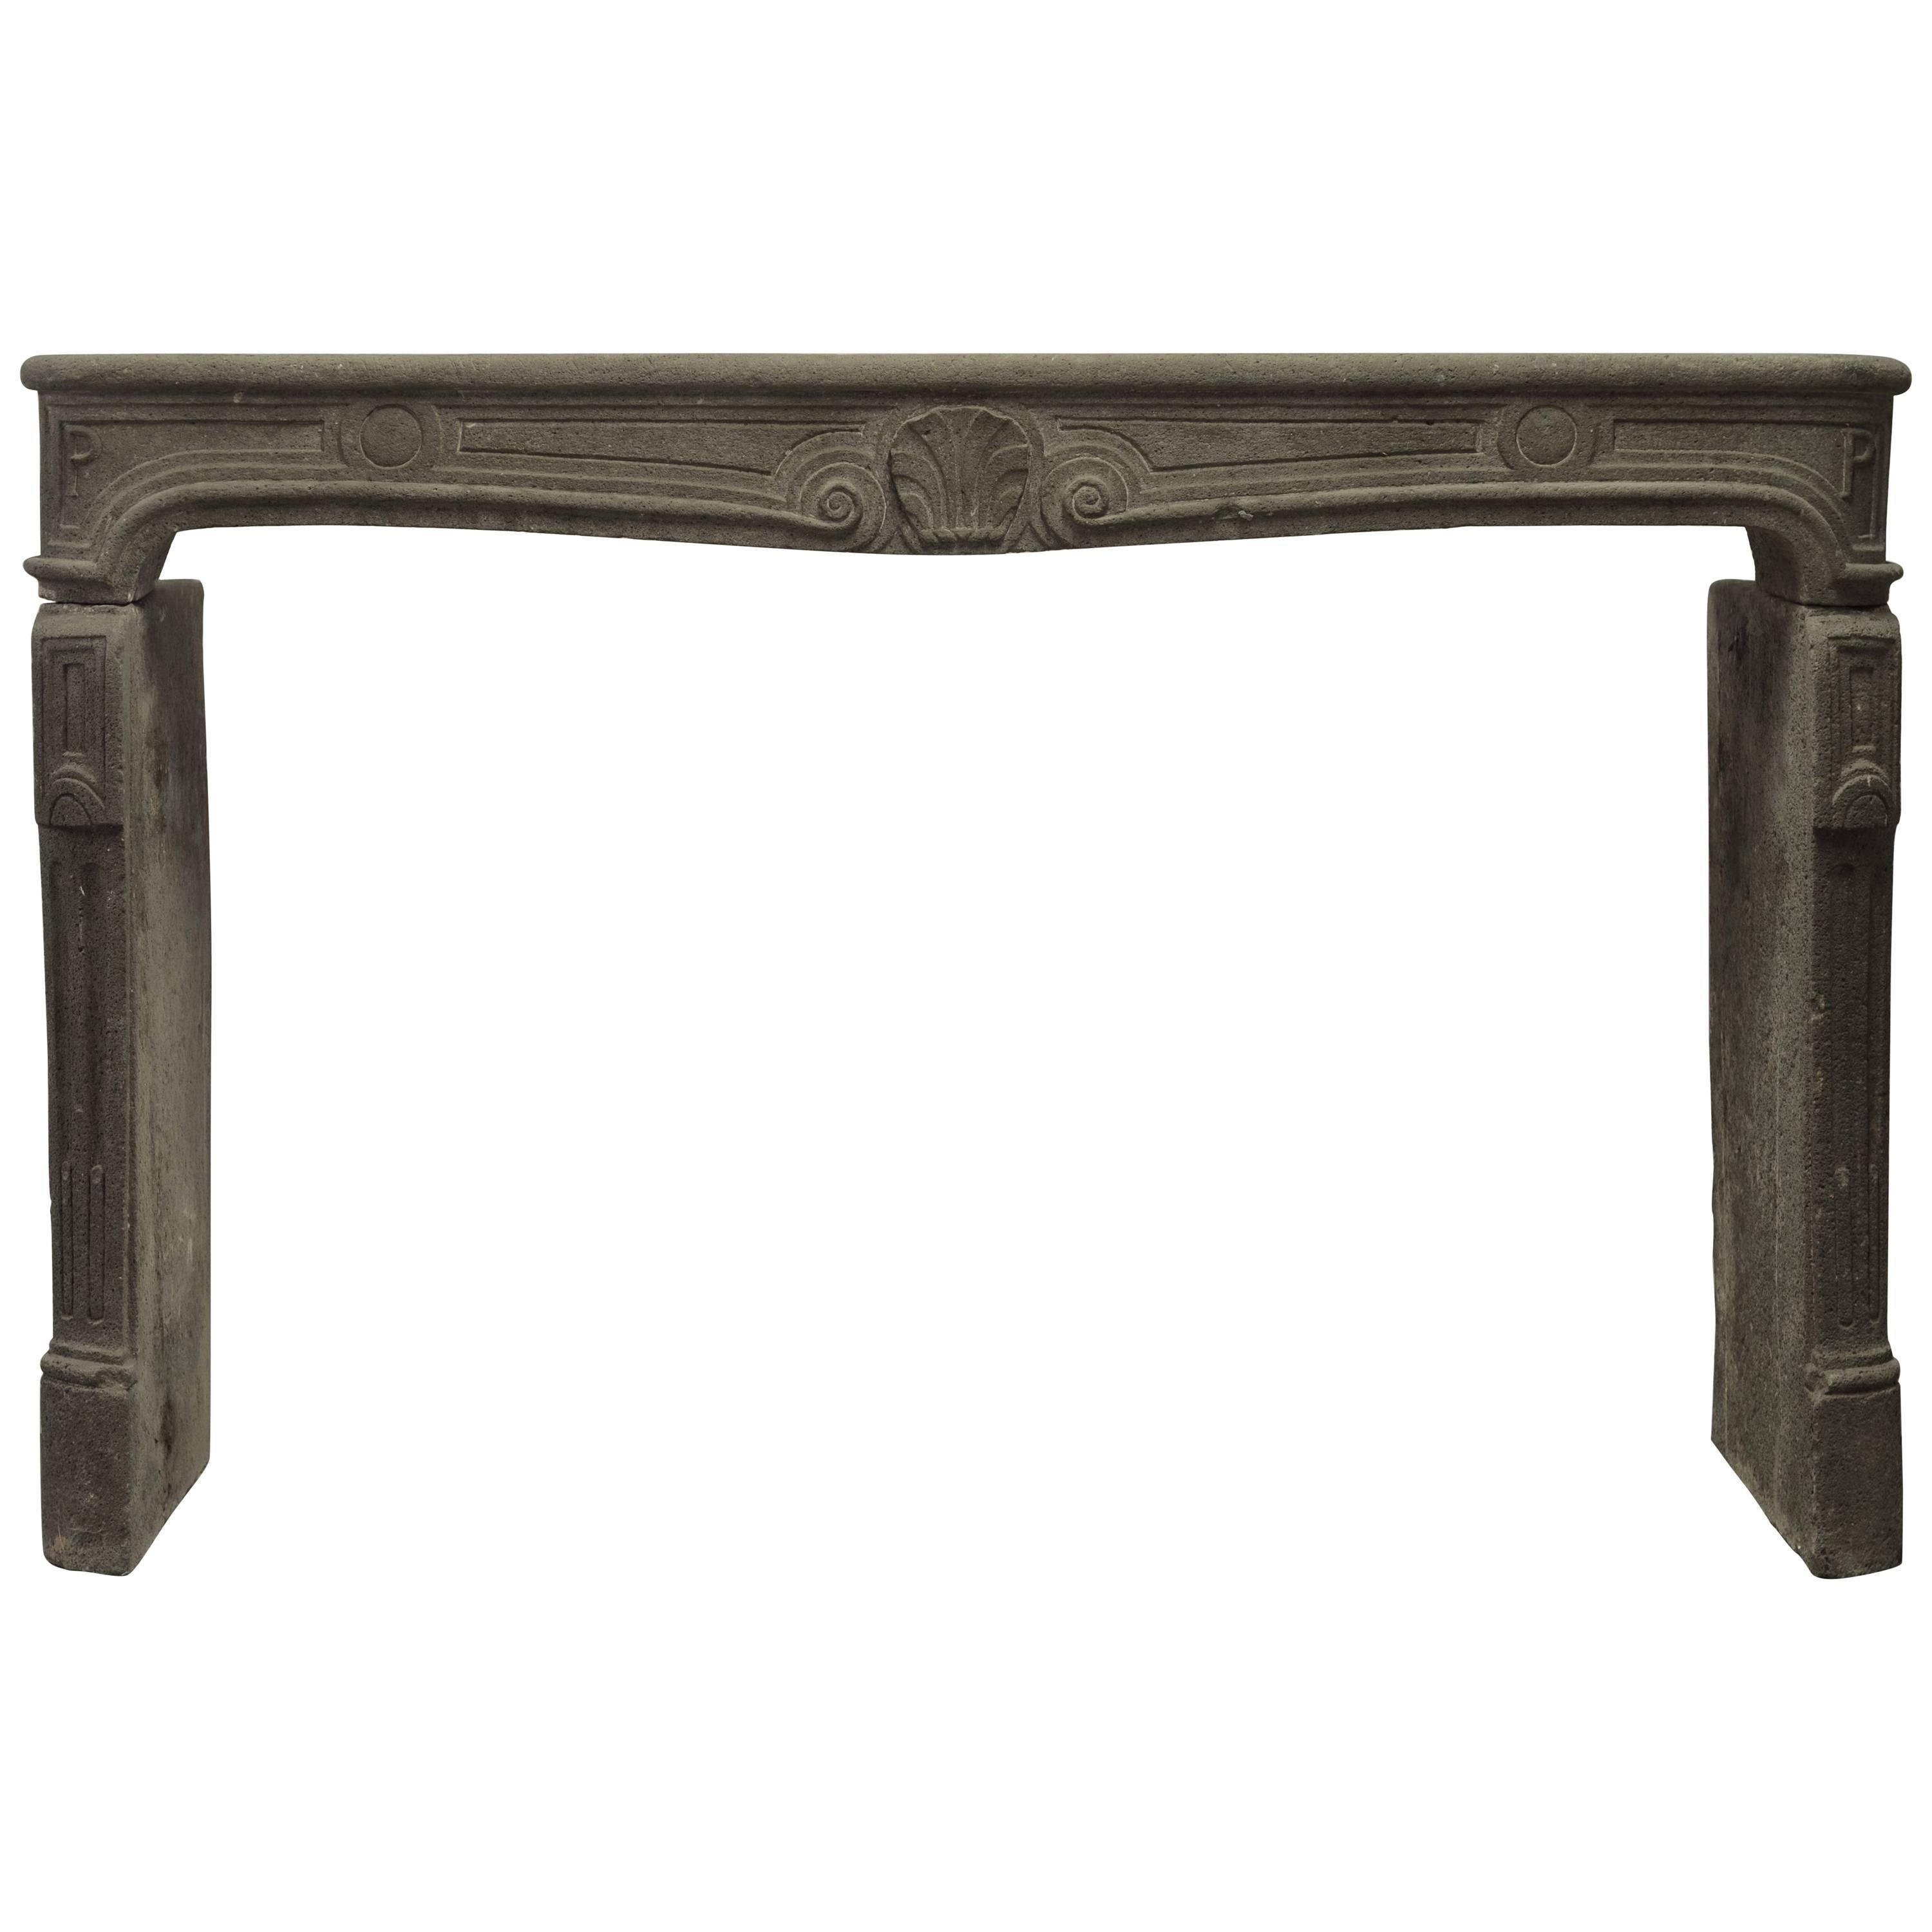 Large 18th Century French Louis XV Fireplace Mantel in Lava Stone